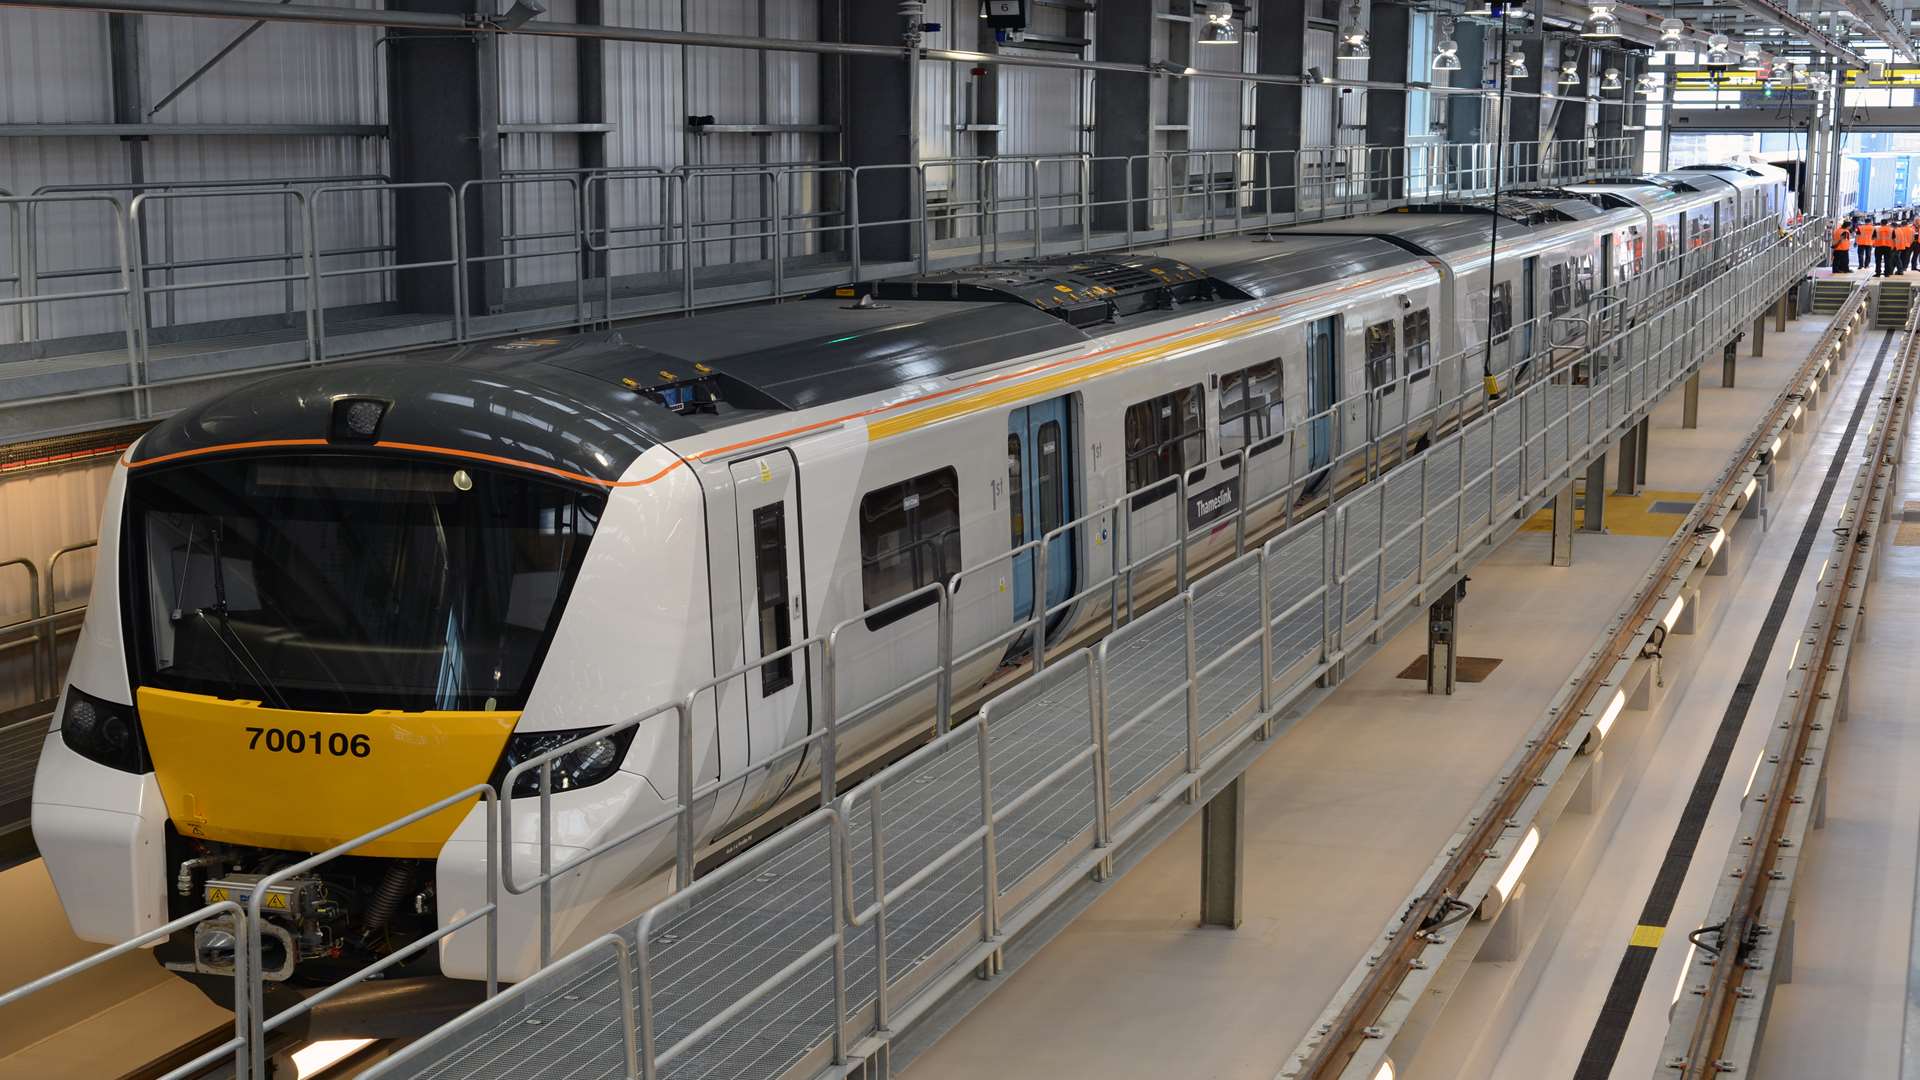 Services would be operated by the new Class 700